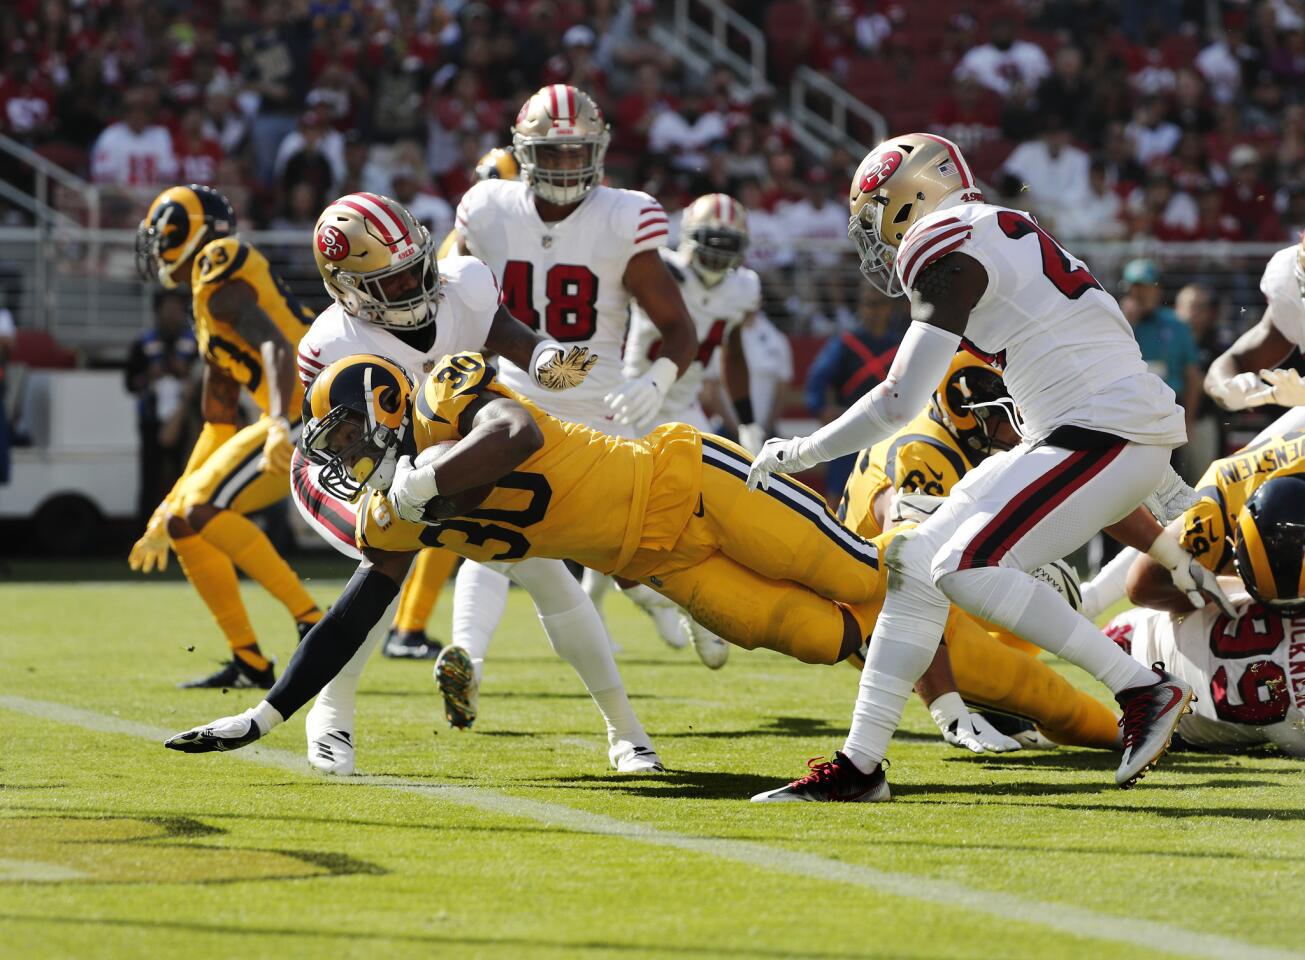 Rams running back Todd Gurley (30) scores on a 7-yard run against San Francisco 49ers in the first half at Levi's Stadium on Sunday in Santa Clara.